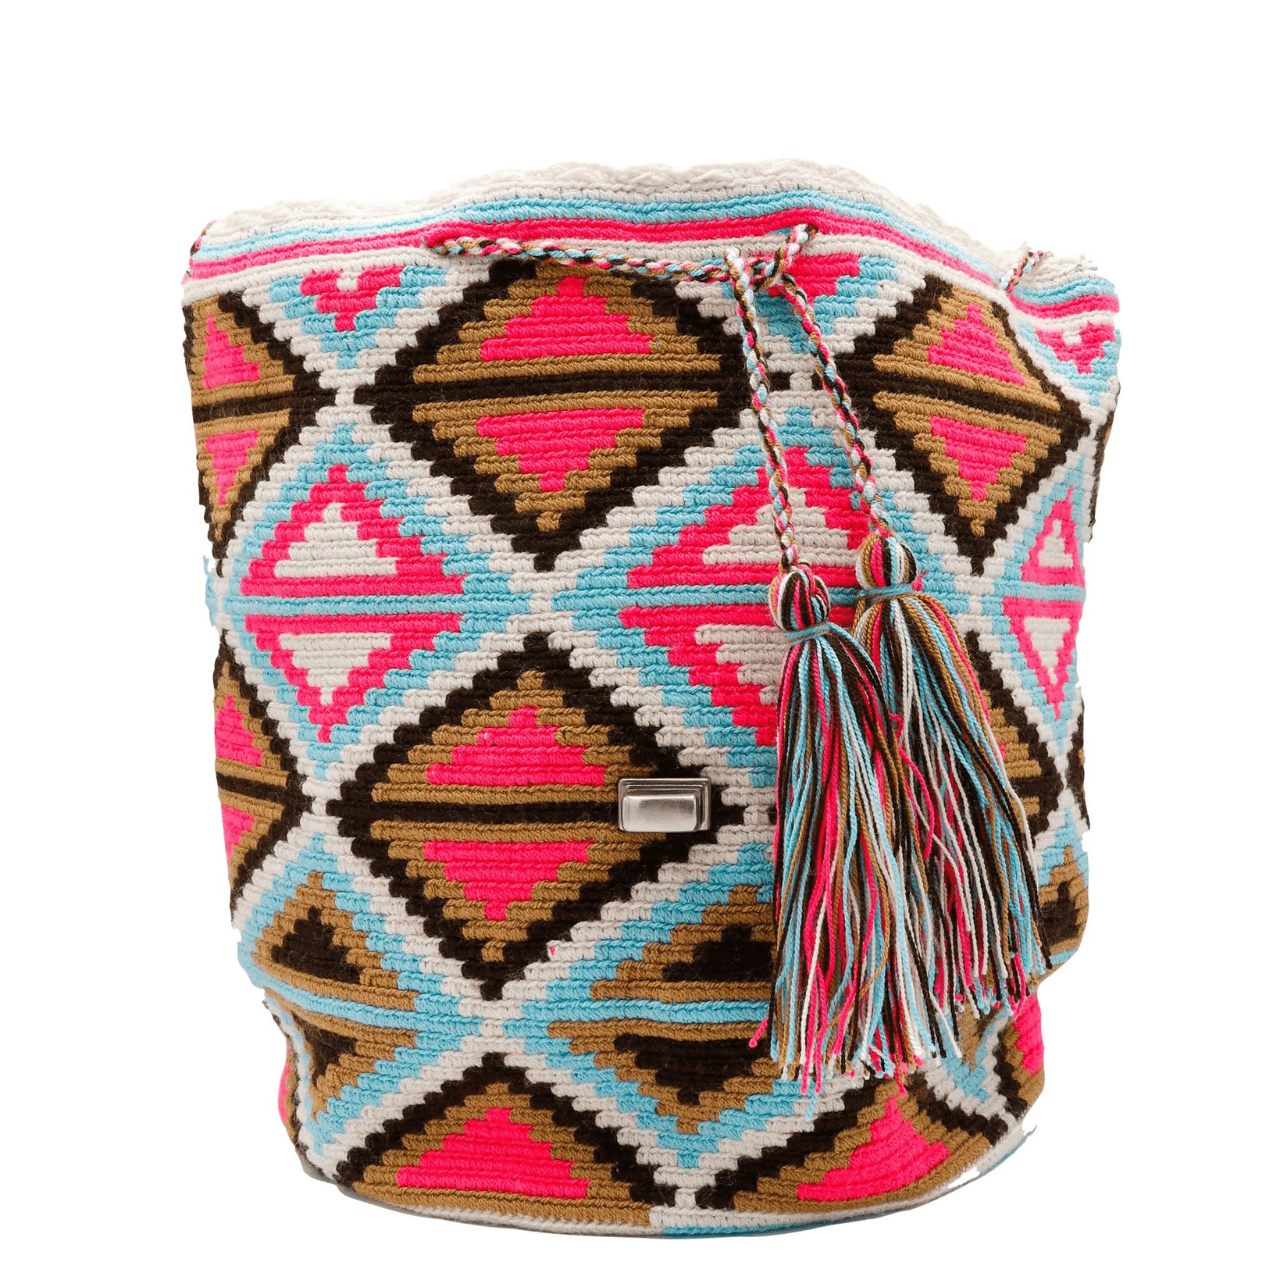 Mompox backpack purse for women, adorned with light blue genuine leather and showcasing an exceptionally unique Wayuu design on the body. The vibrant pattern features a delightful blend of sky blue, brown, tan, hot pink, and white hues, exuding a groovy and energetic vibe. Perfect for women seeking a stylish and trendy accessory.